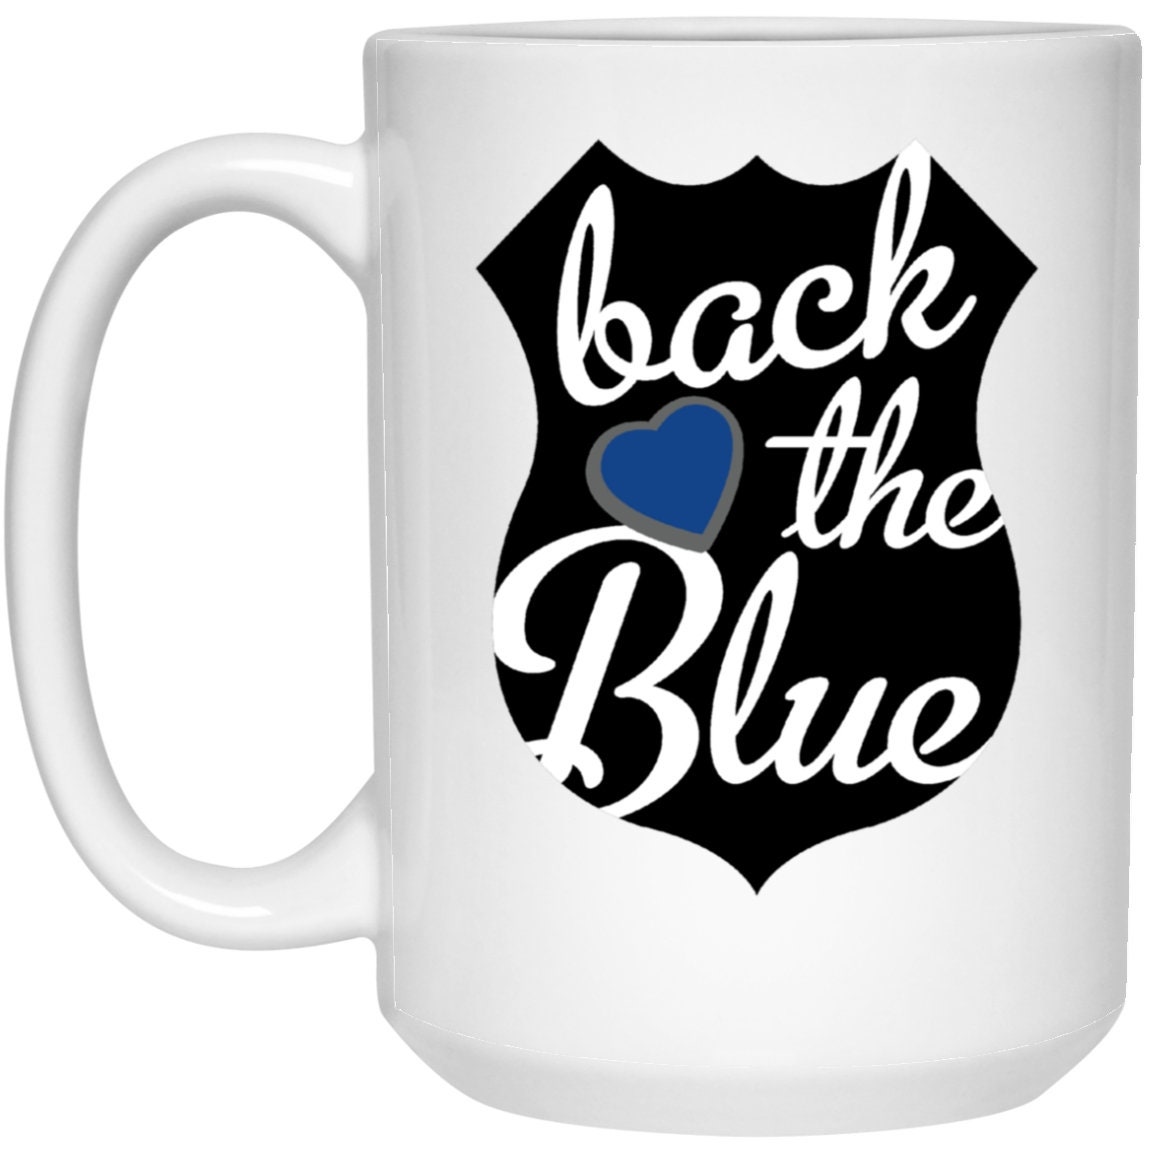 Back The Blue 15 oz White Ceramic Coffee Tea Mug is part of Old Tortuga's Sweet Life Collection offered through Mugs4YourSoul